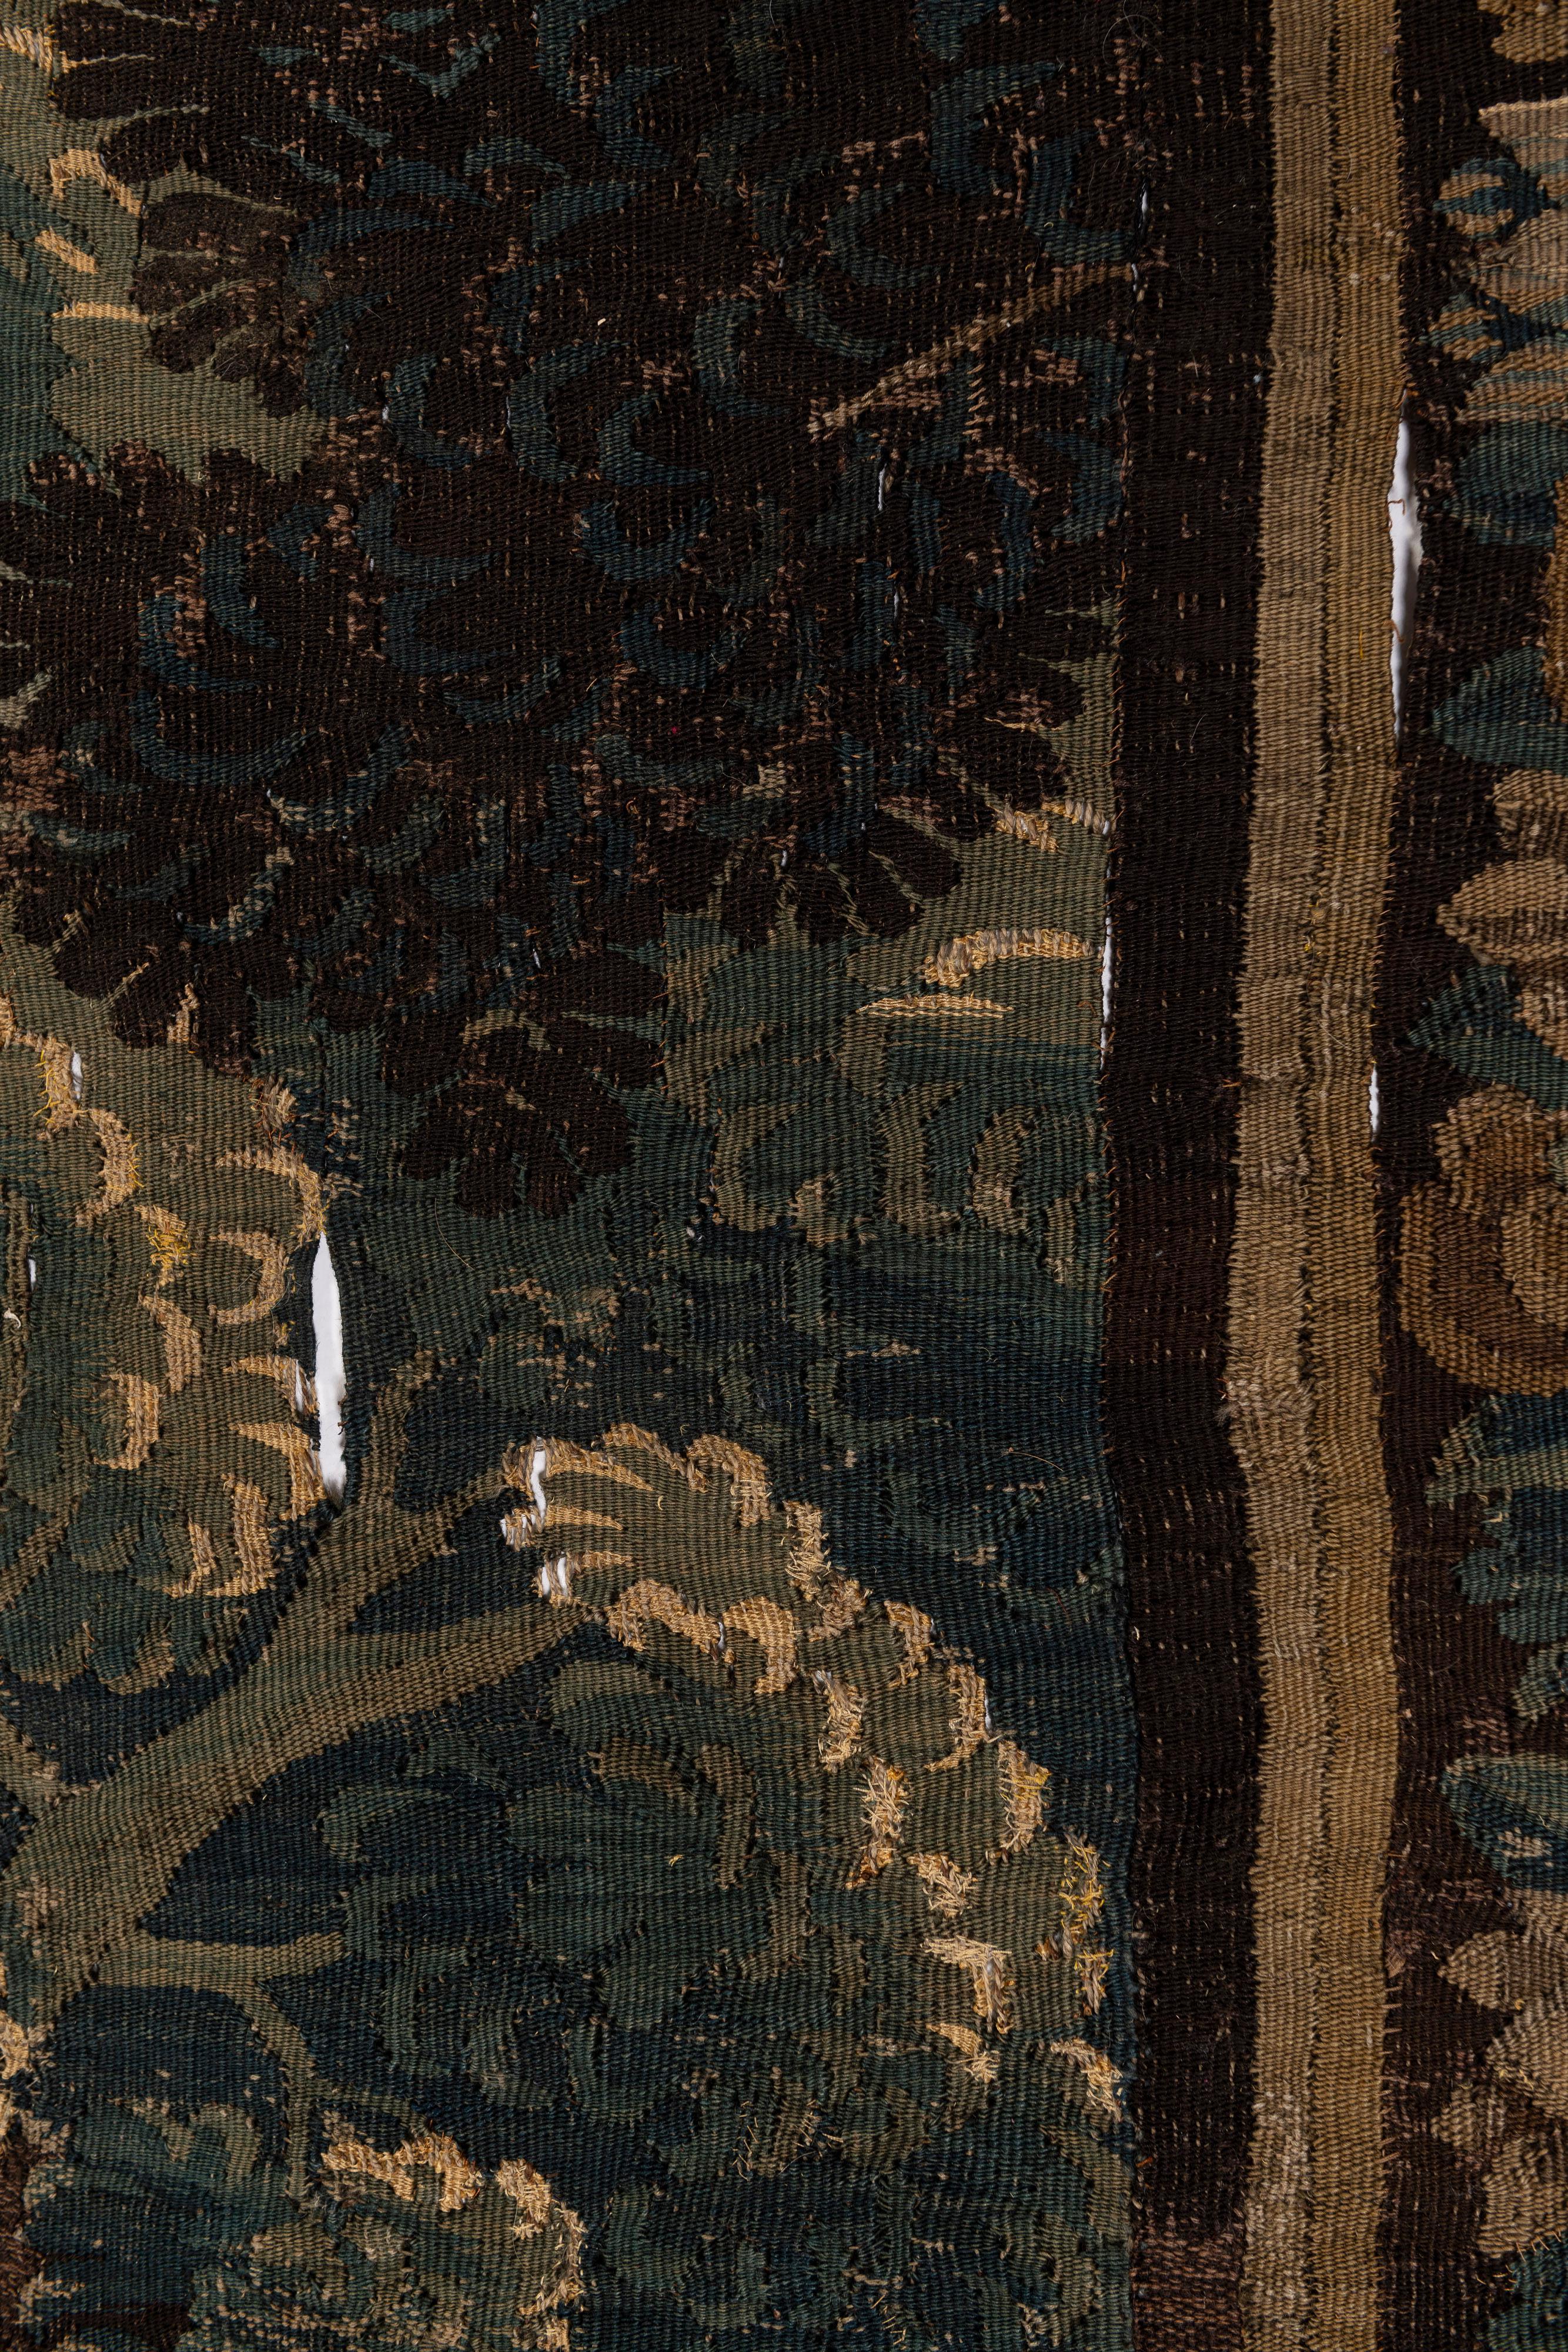 18th Century and Earlier Hand-Woven Antique 17th Century Aubusson Verdure Tapestry, France For Sale